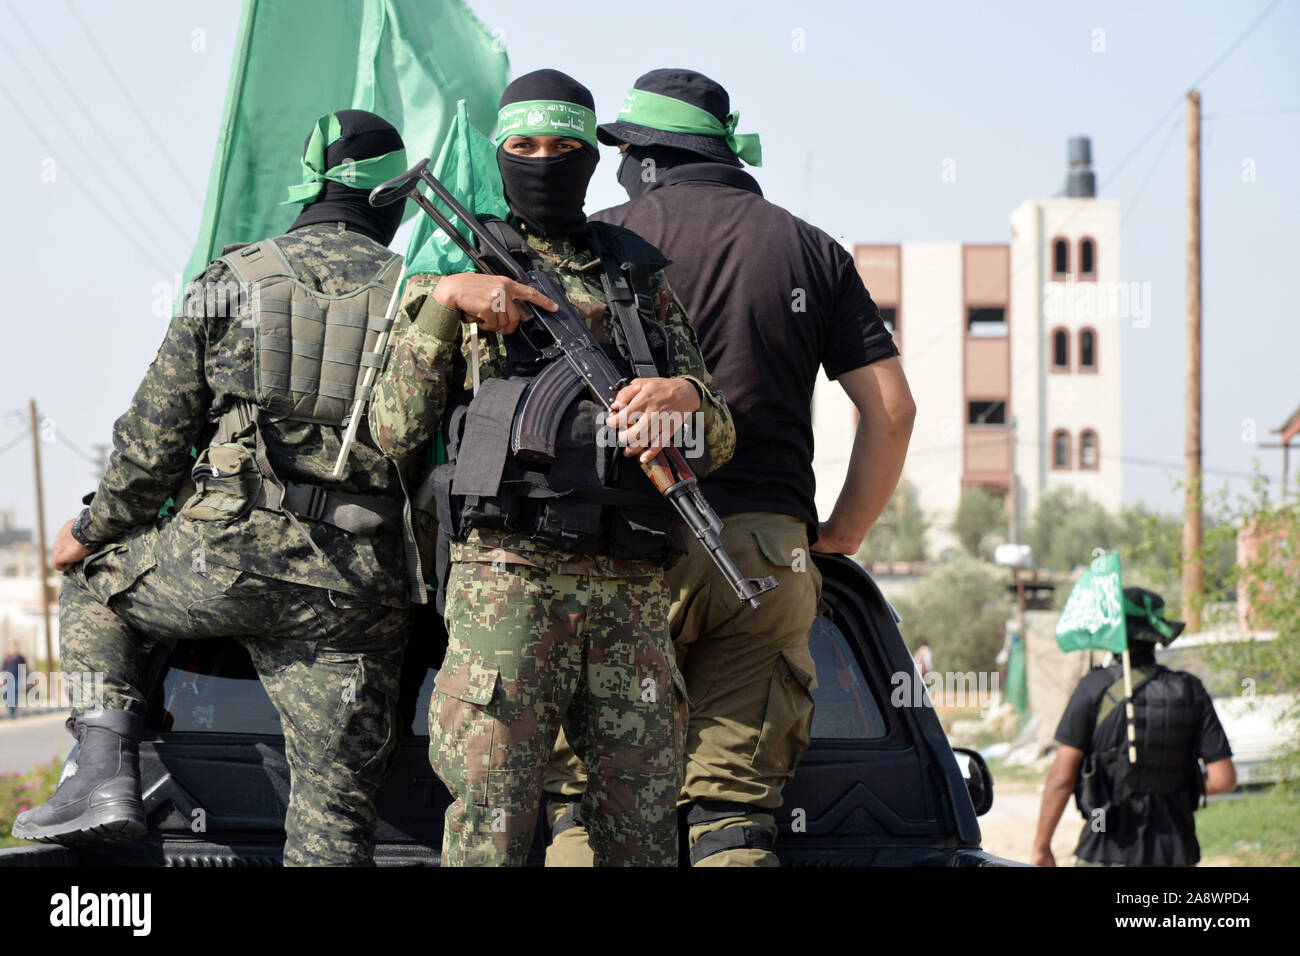 Khan Younis, Gaza, Palestinian  members of al-Qassam  Brigades, the armed wing of the Hamas movement, hold their weapons during  an anti-Israel military parade in the southern Gaza Strip city of Khan